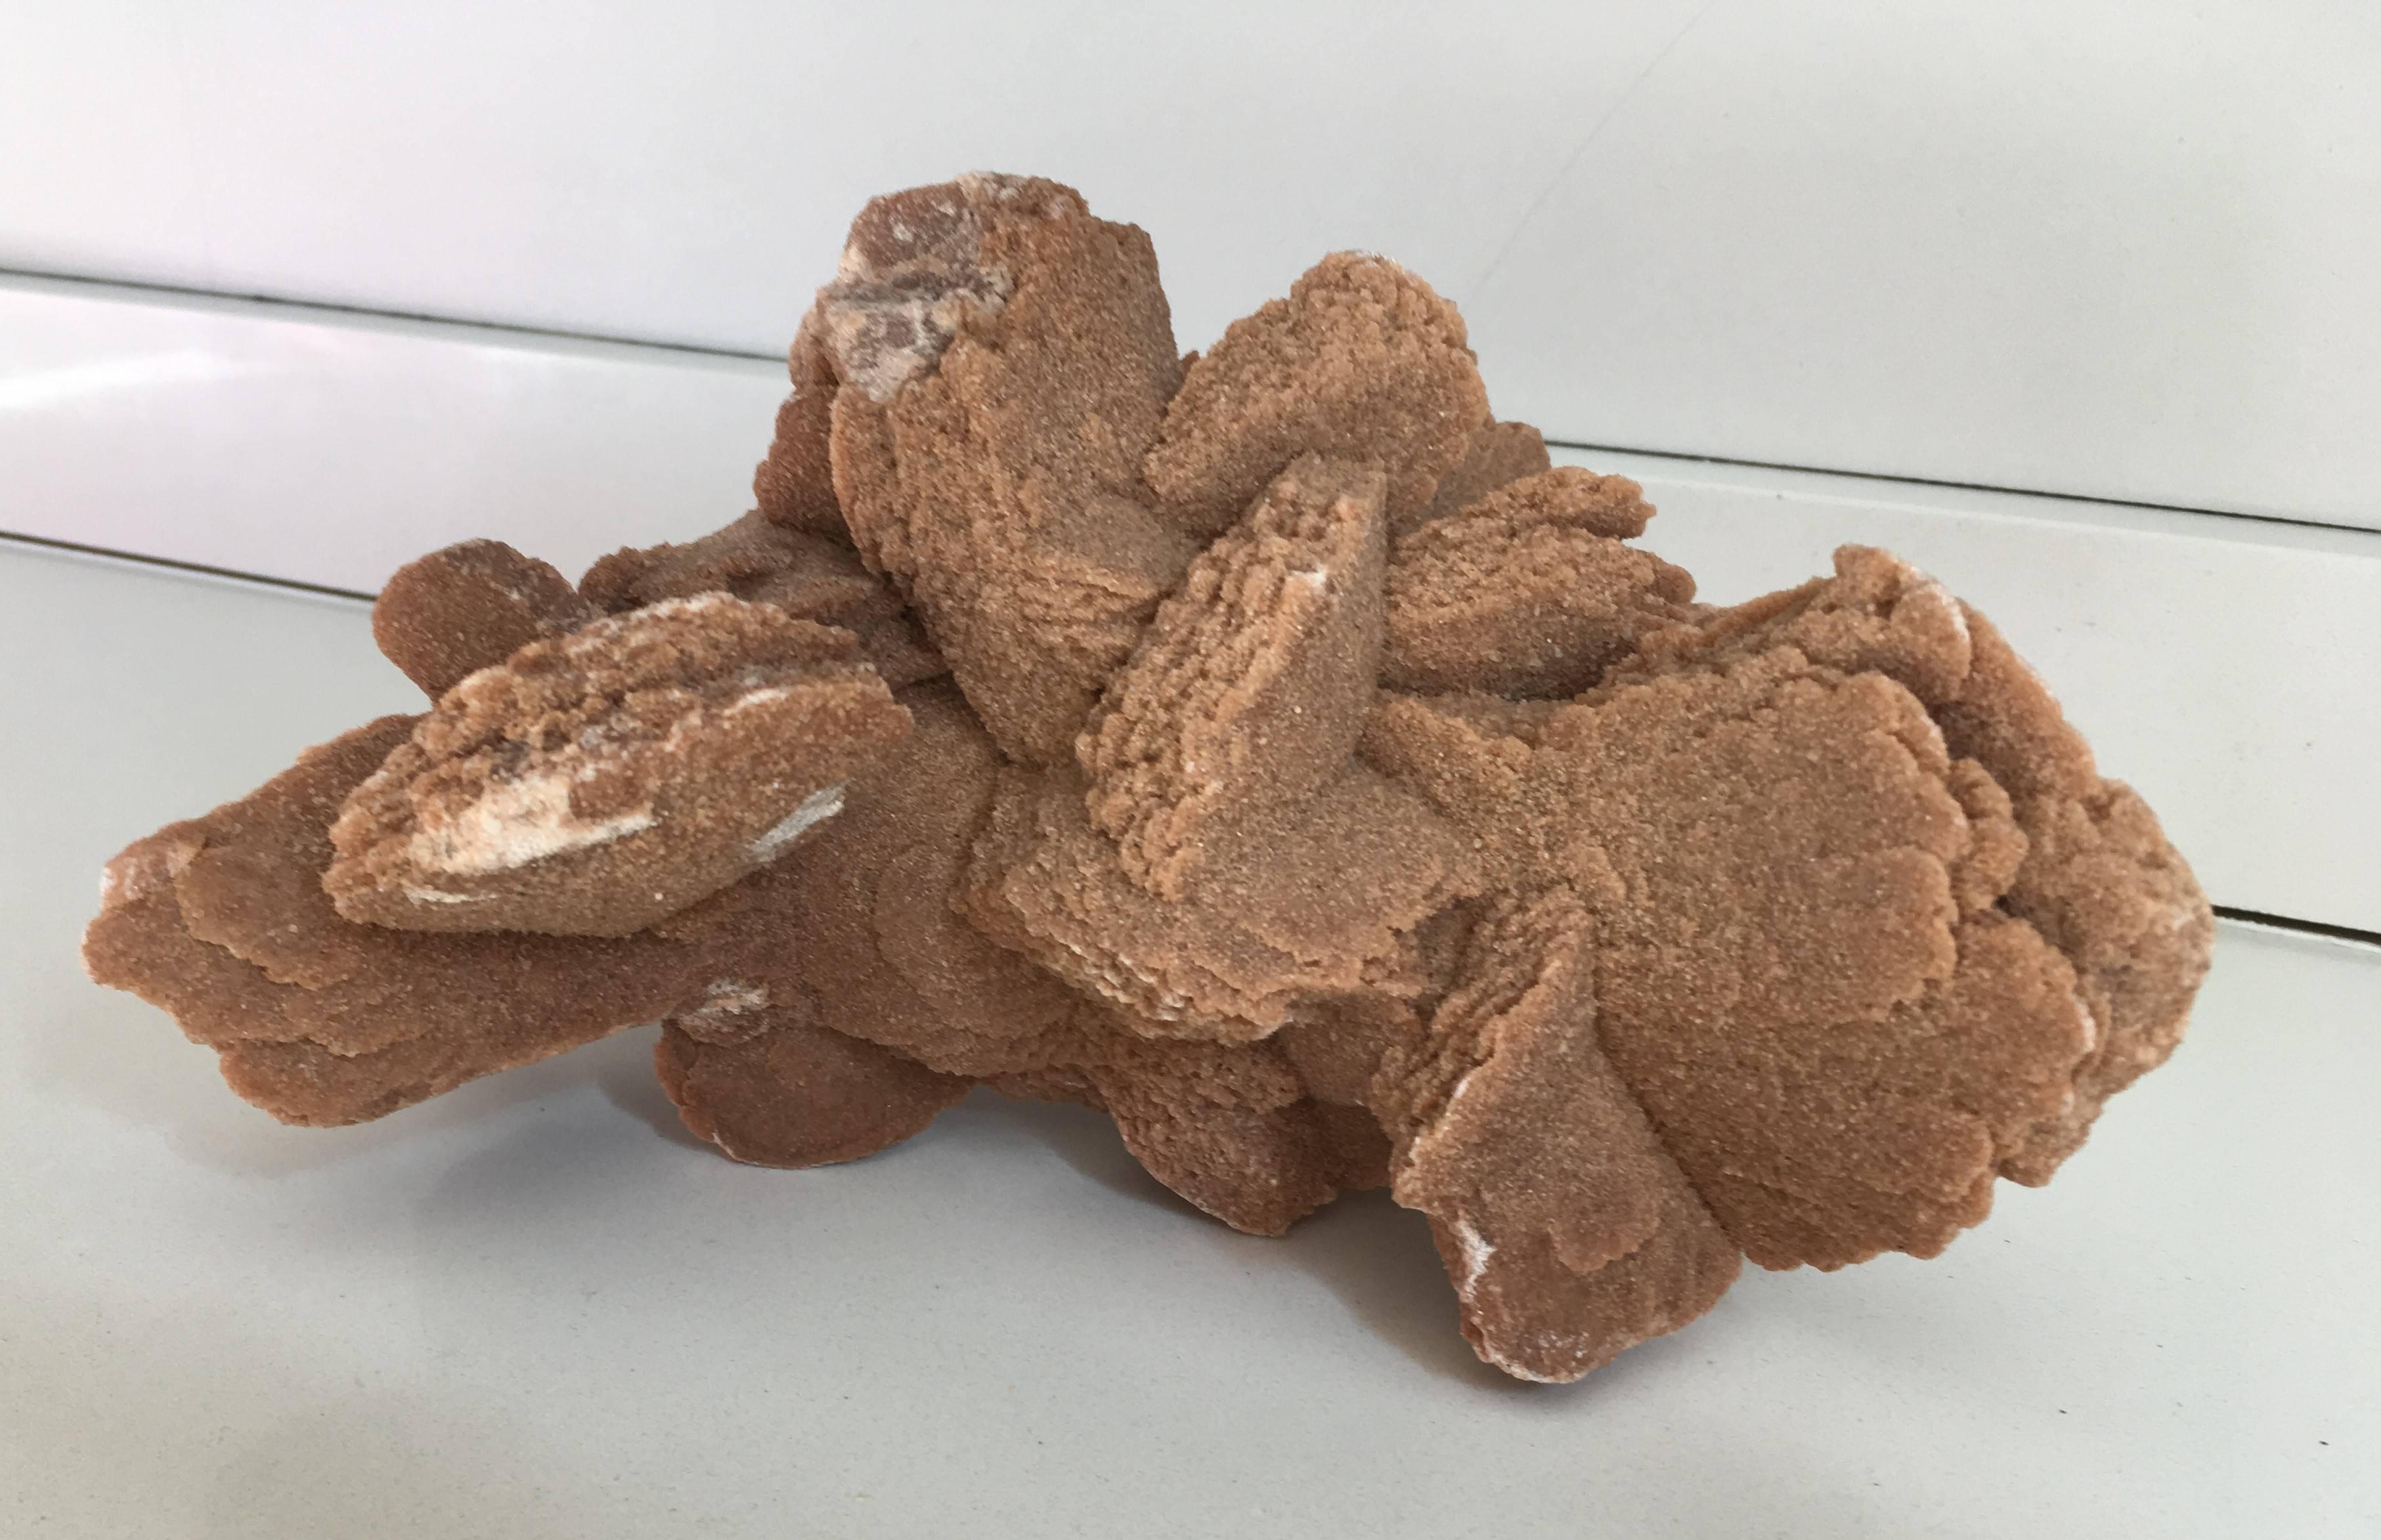 ‘Desert Rose’ selenite crystal 
Formation desert roses are crystal clusters formed of gypsum barite and sand. It can take nature up to hundreds of thousands of years to form these flower-like sculptures. This desert rose is the orange, like